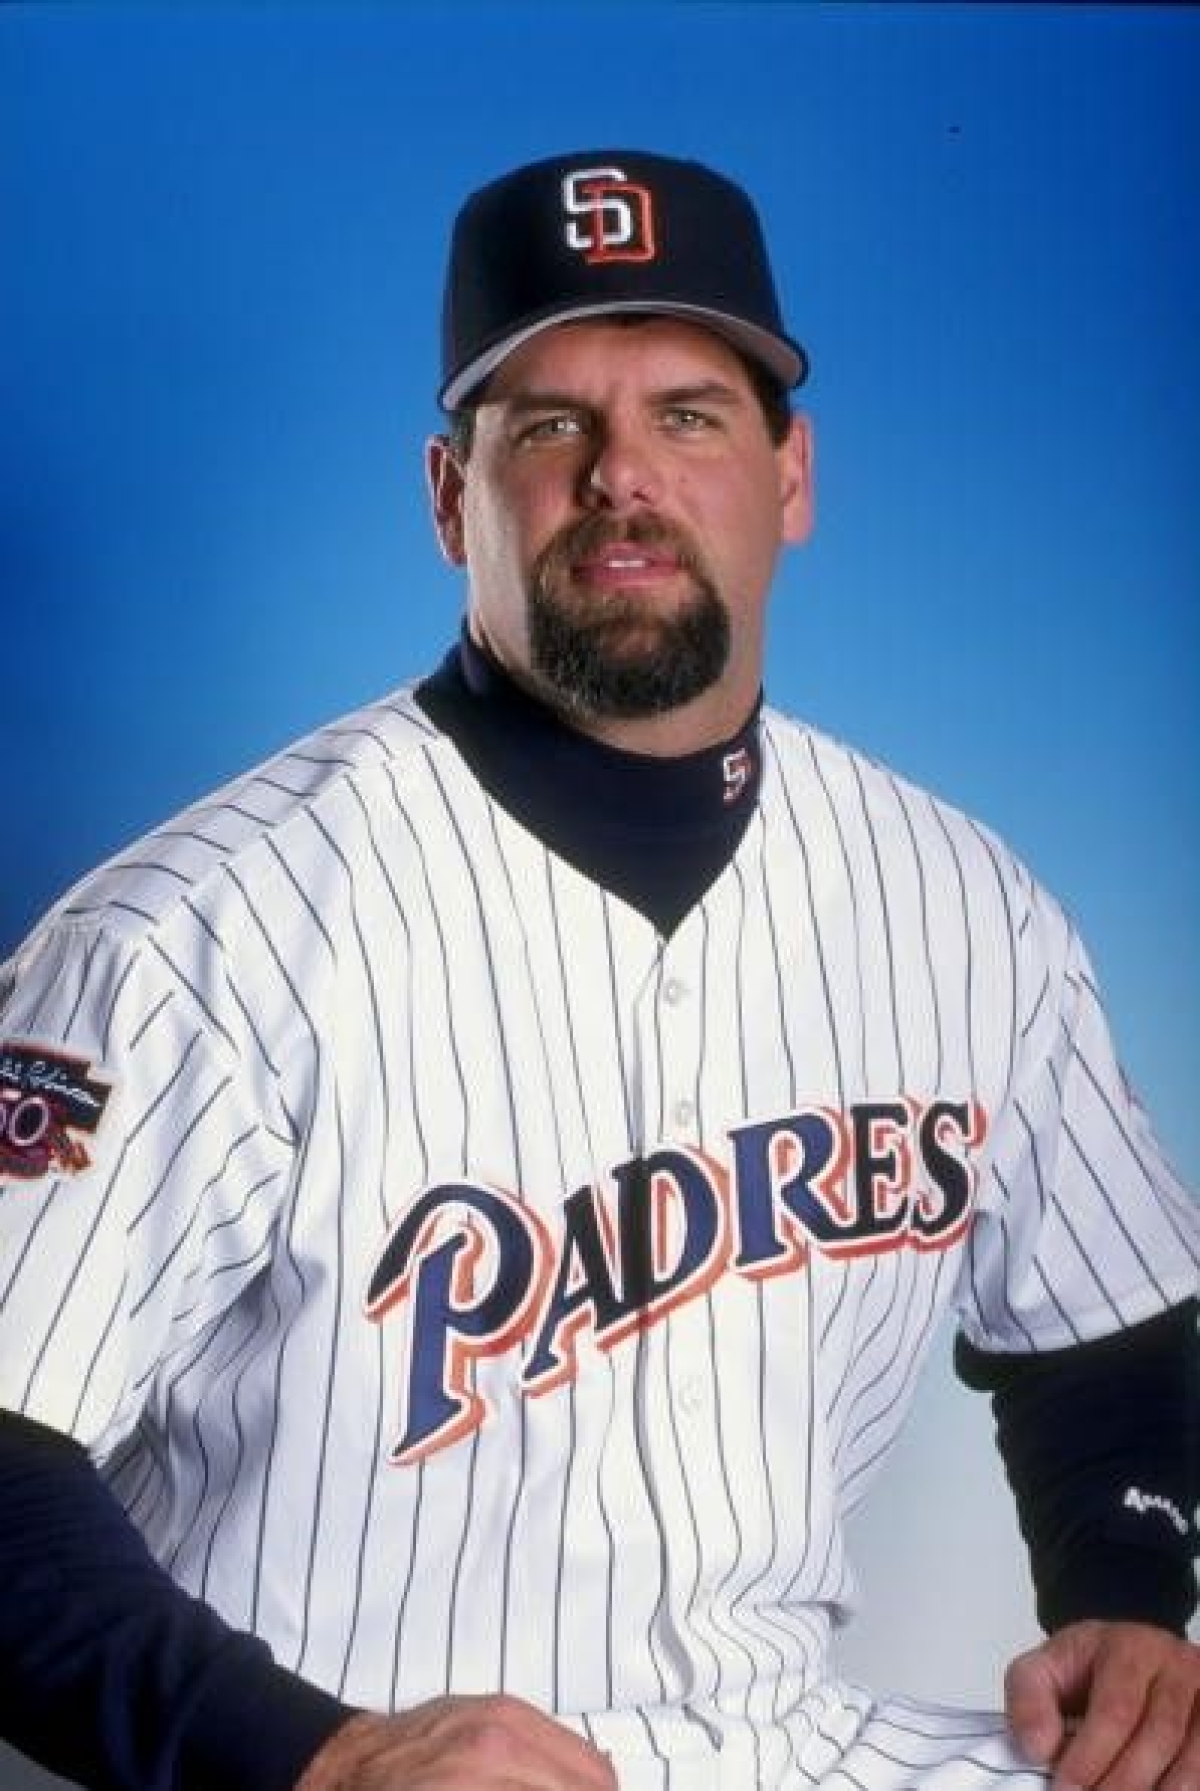 Not in Hall of Fame - 11. Ken Caminiti